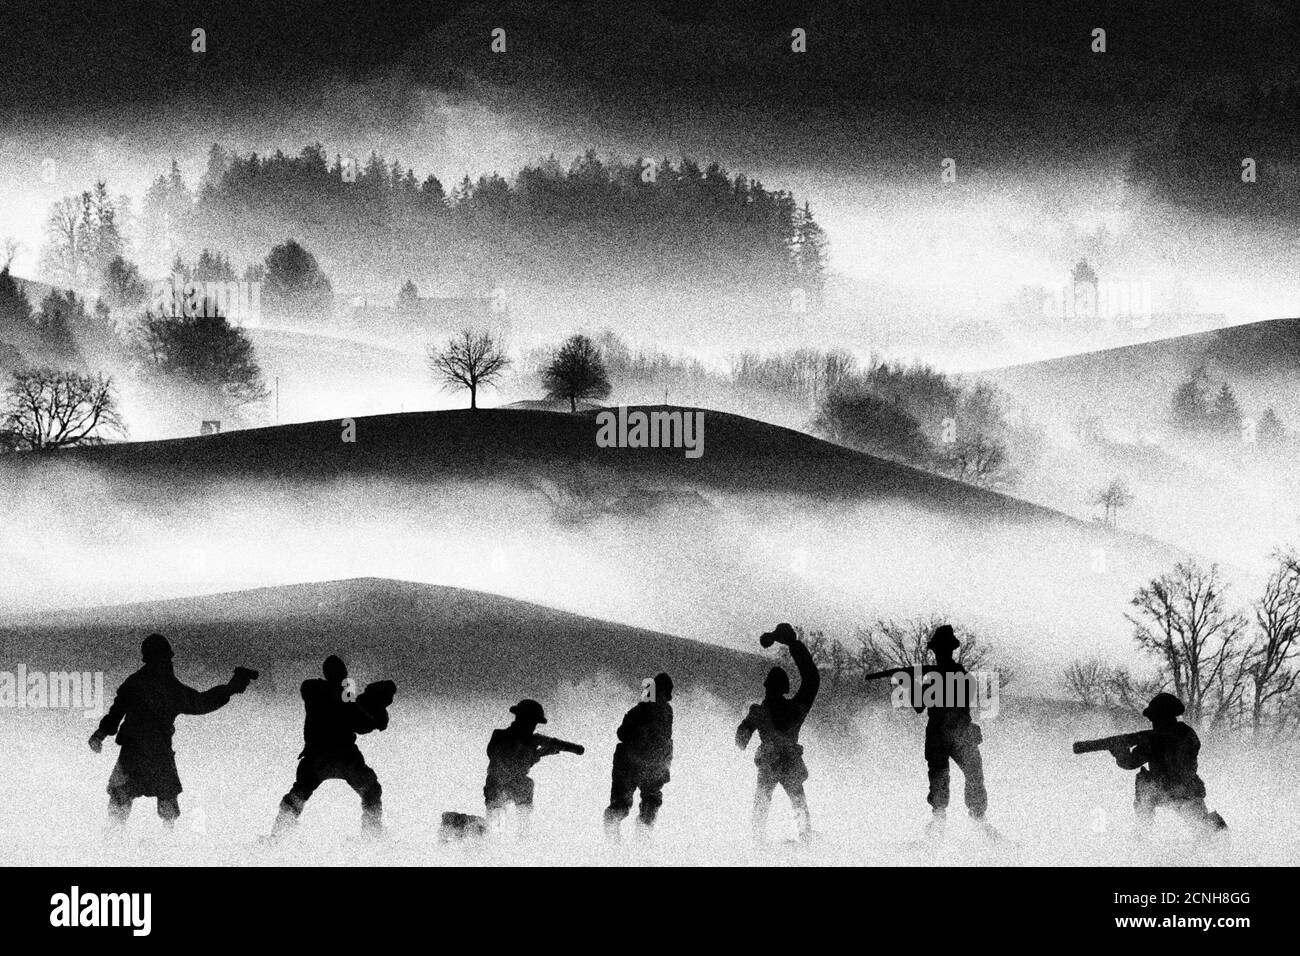 War concept. Vintage military silhouettes fighting scene  background, Civil war soldiers silhouettes attack scene in a foggy landscape. Analog film lo Stock Photo